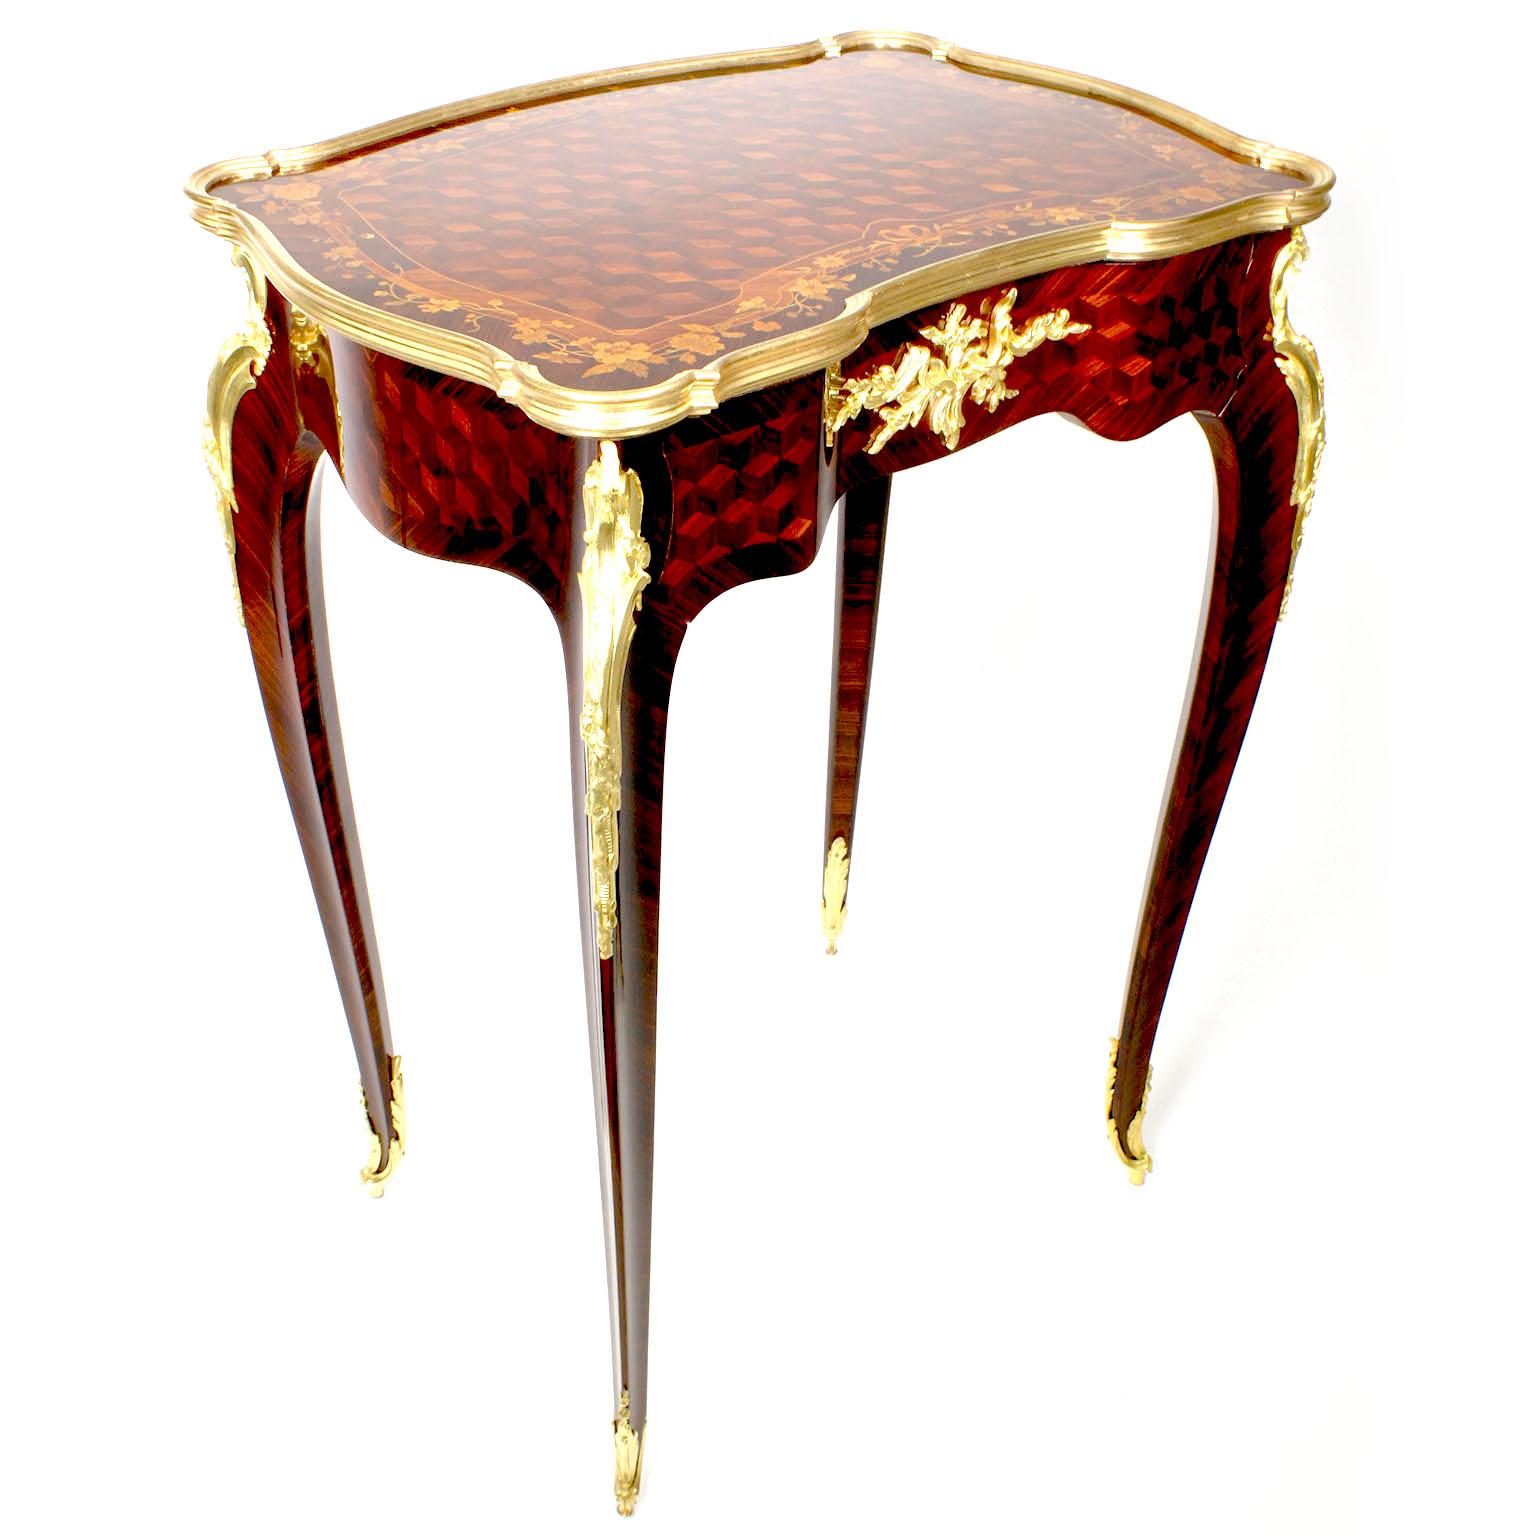 A Very Fine French Louis XV Transitional Style Gilt-Bronze Mounted, Marquetry and Æil de Vermeil Parquetry single-drawer side-table by François Linke (1855-1946). The rectangular top with a kingwood and satinwood parquetry design and a fruitwood